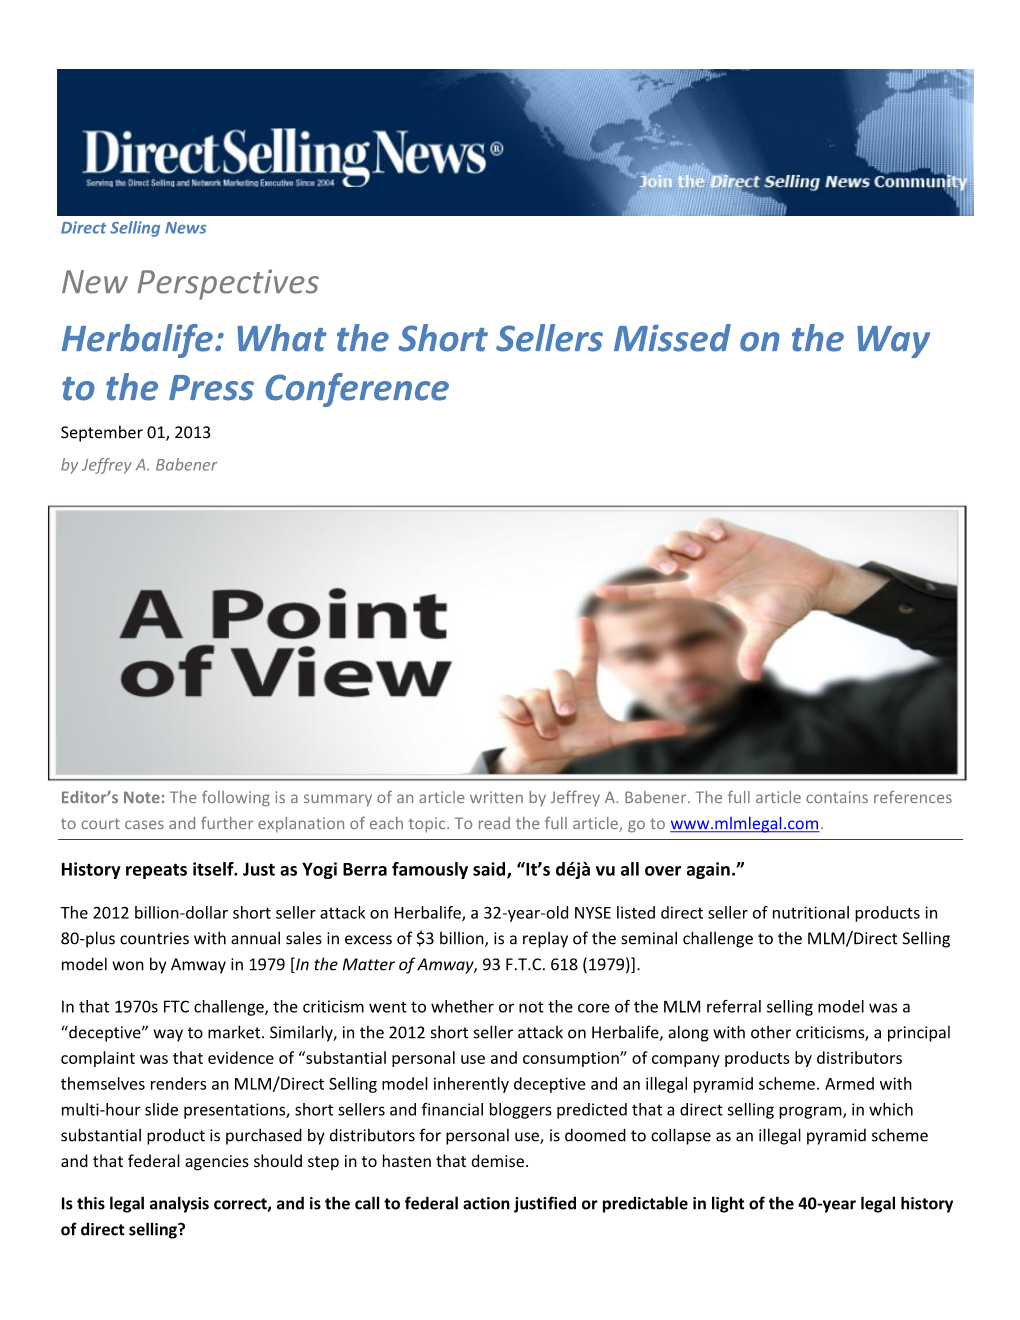 Herbalife: What the Short Sellers Missed on the Way to the Press Conference September 01, 2013 by Jeffrey A